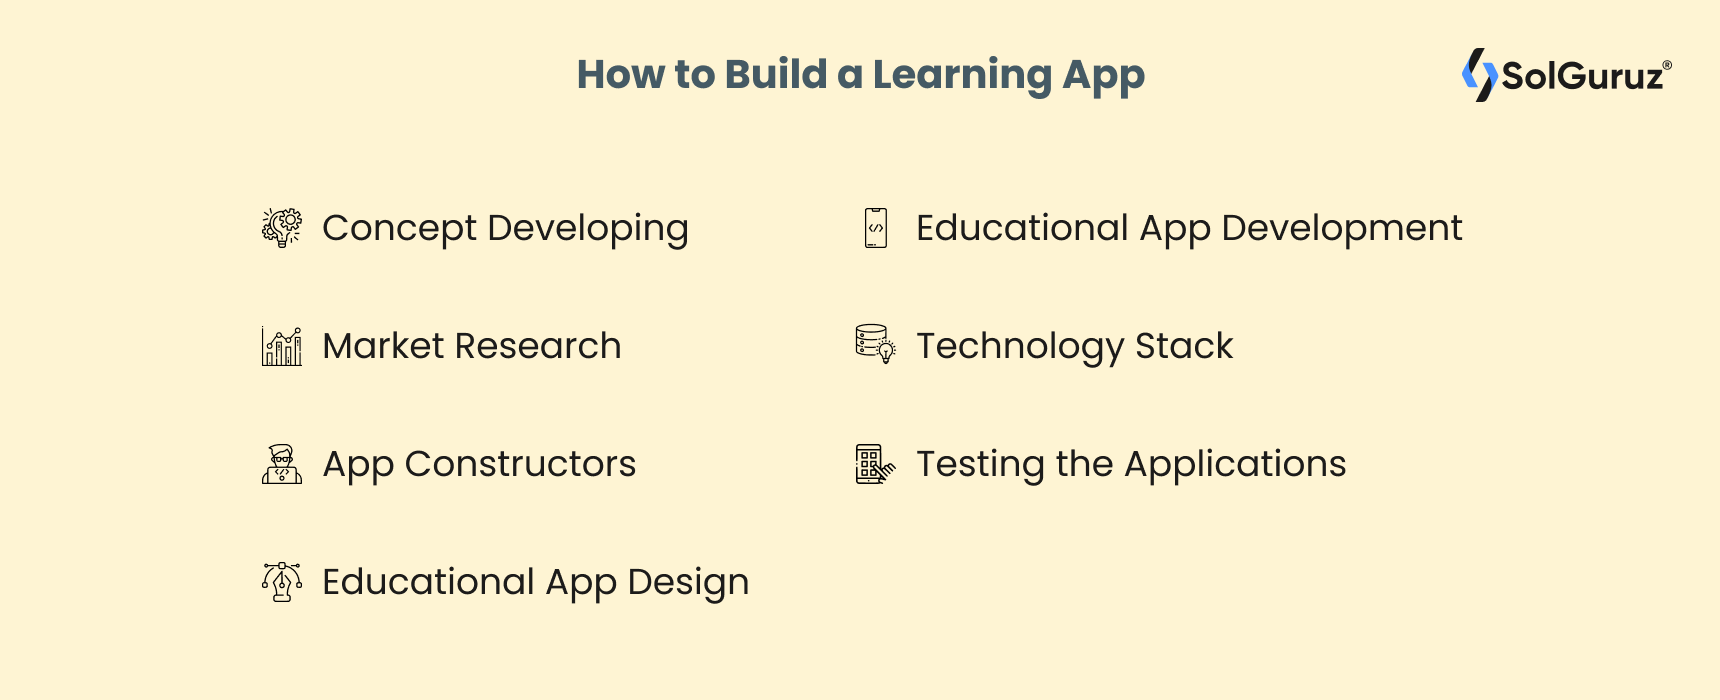 How to Build a Learning App